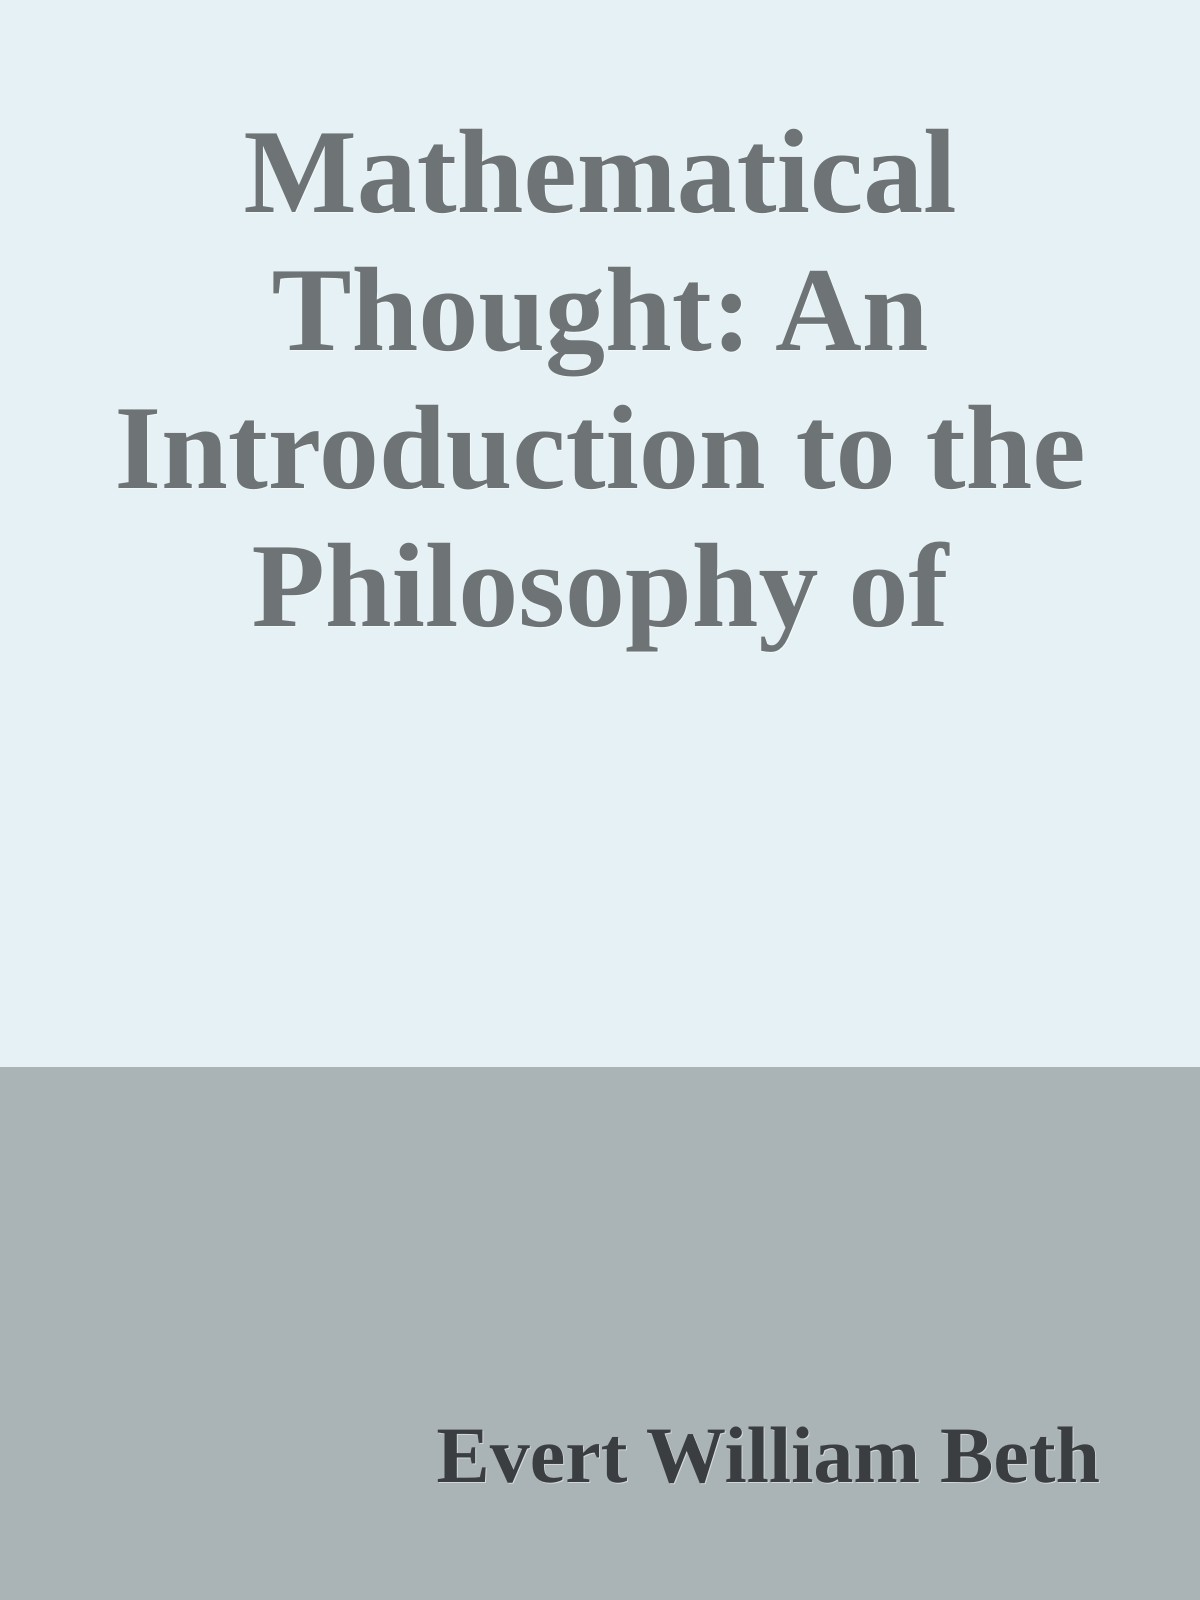 Mathematical Thought: An Introduction to the Philosophy of Mathematics : Part of This Work Transl. From the Dutch by Horace S. Glover